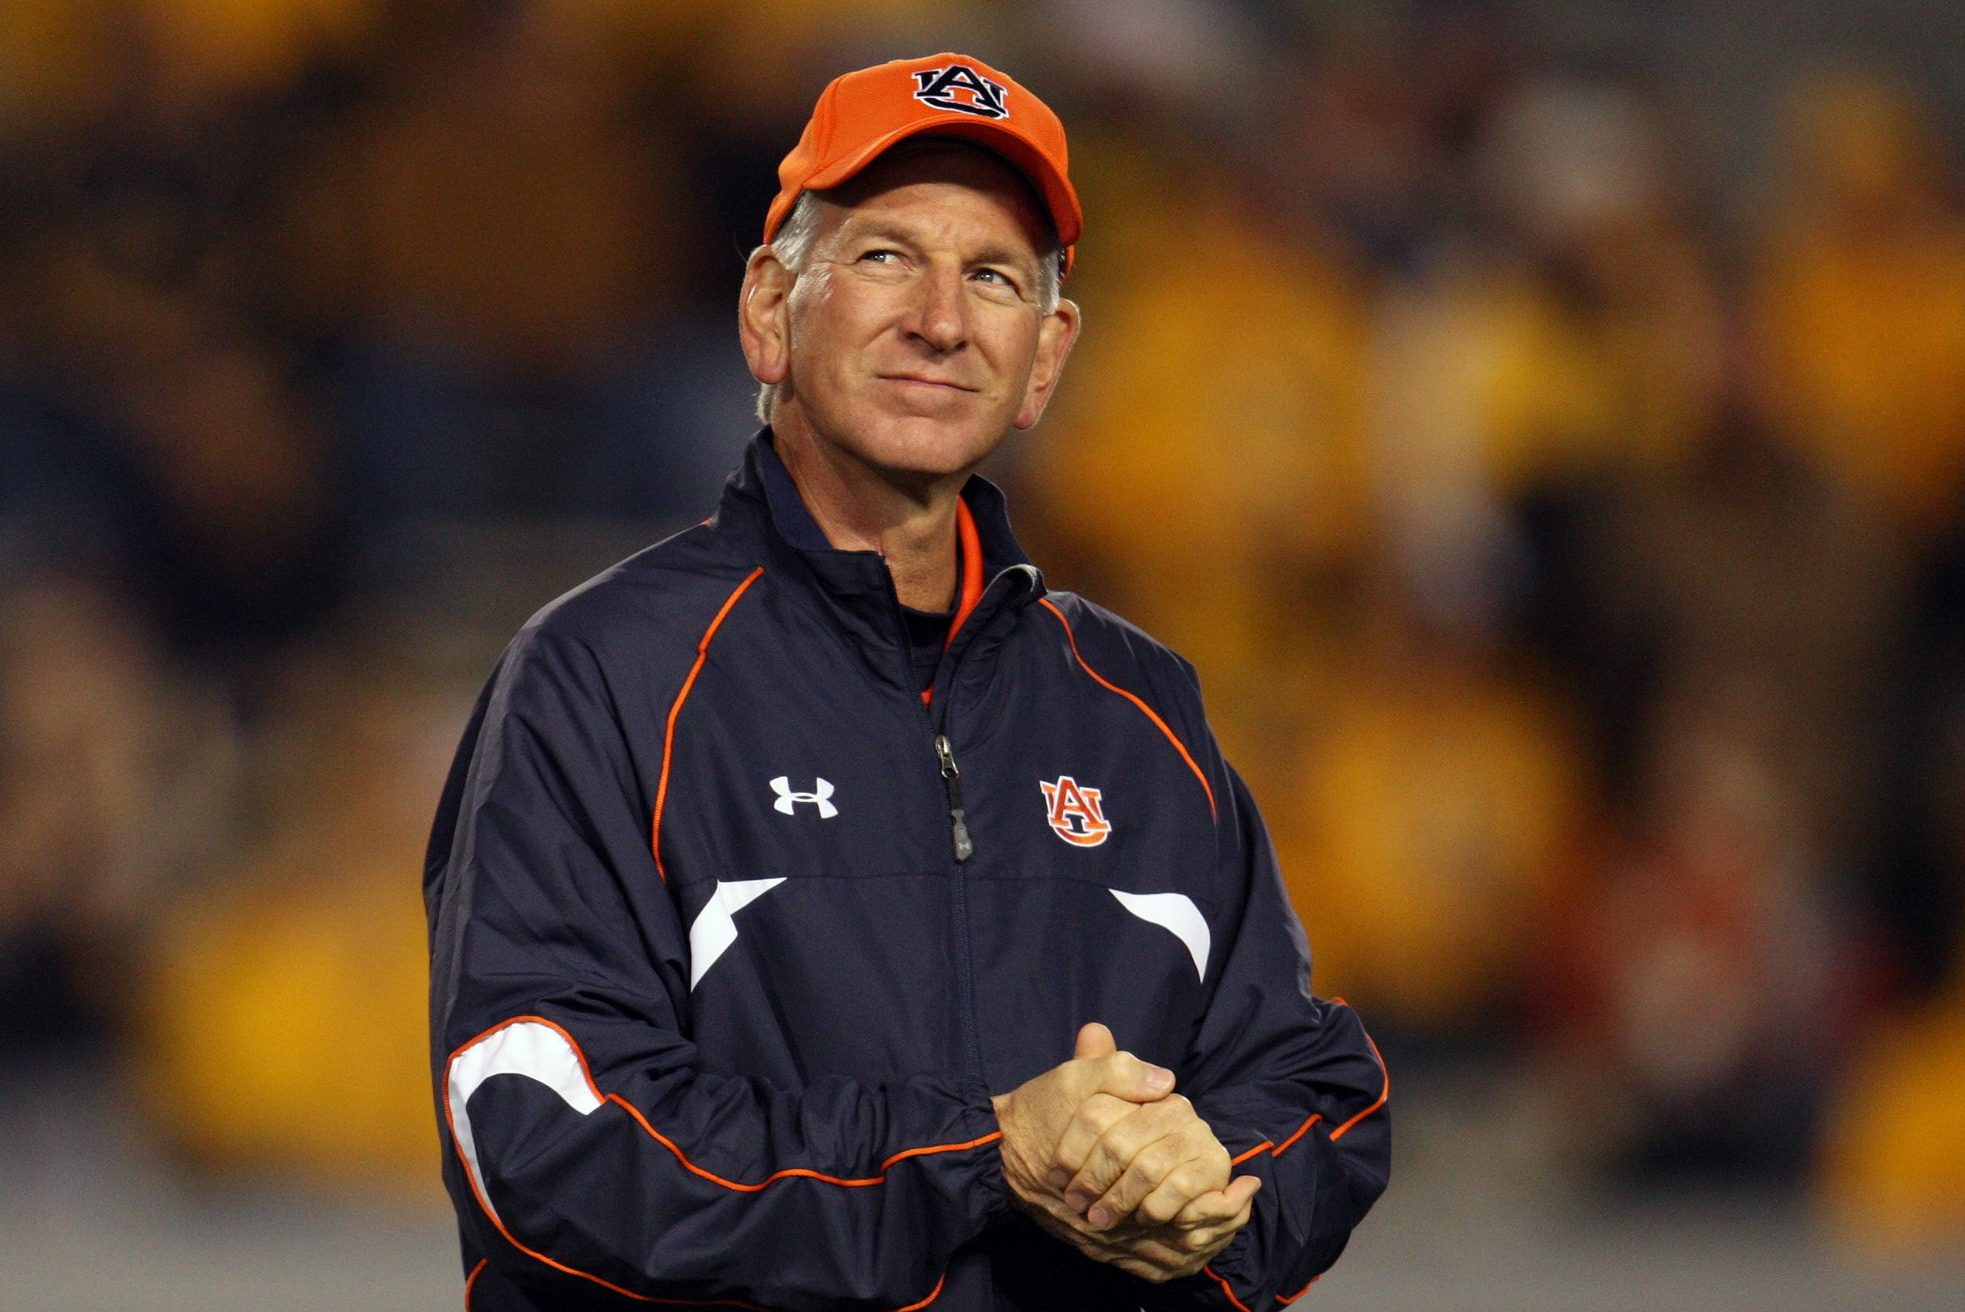 Tommy Tuberville Facing Jeff Sessions in Alabama Senate Runoff